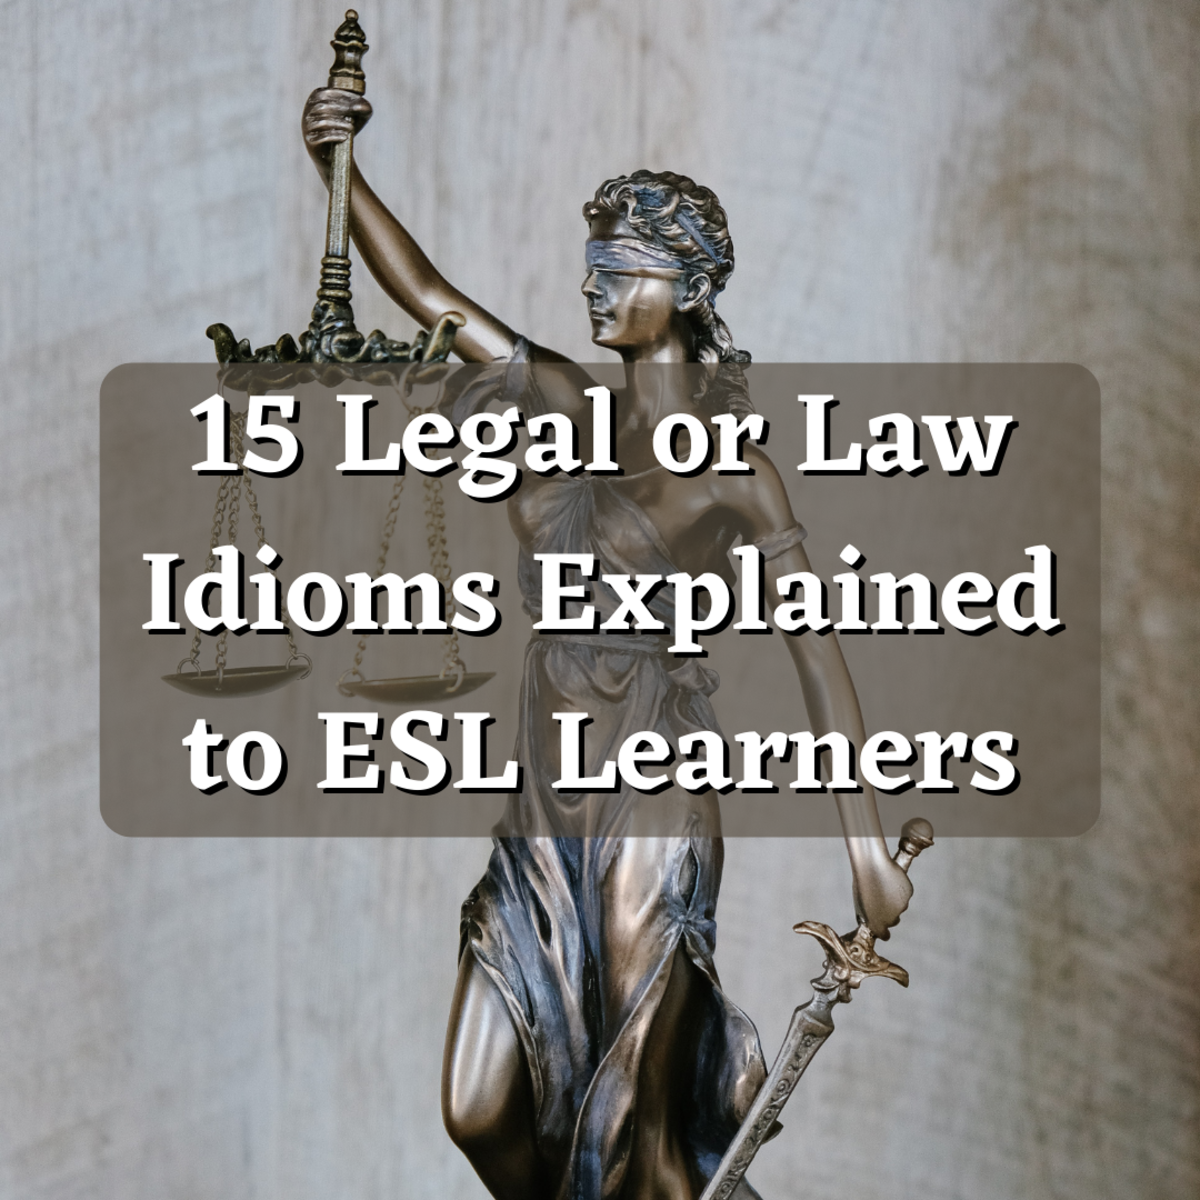 Read on to learn about 15 law- and legal-related English idioms. These will help ESL learners become more familiar with conversational English.